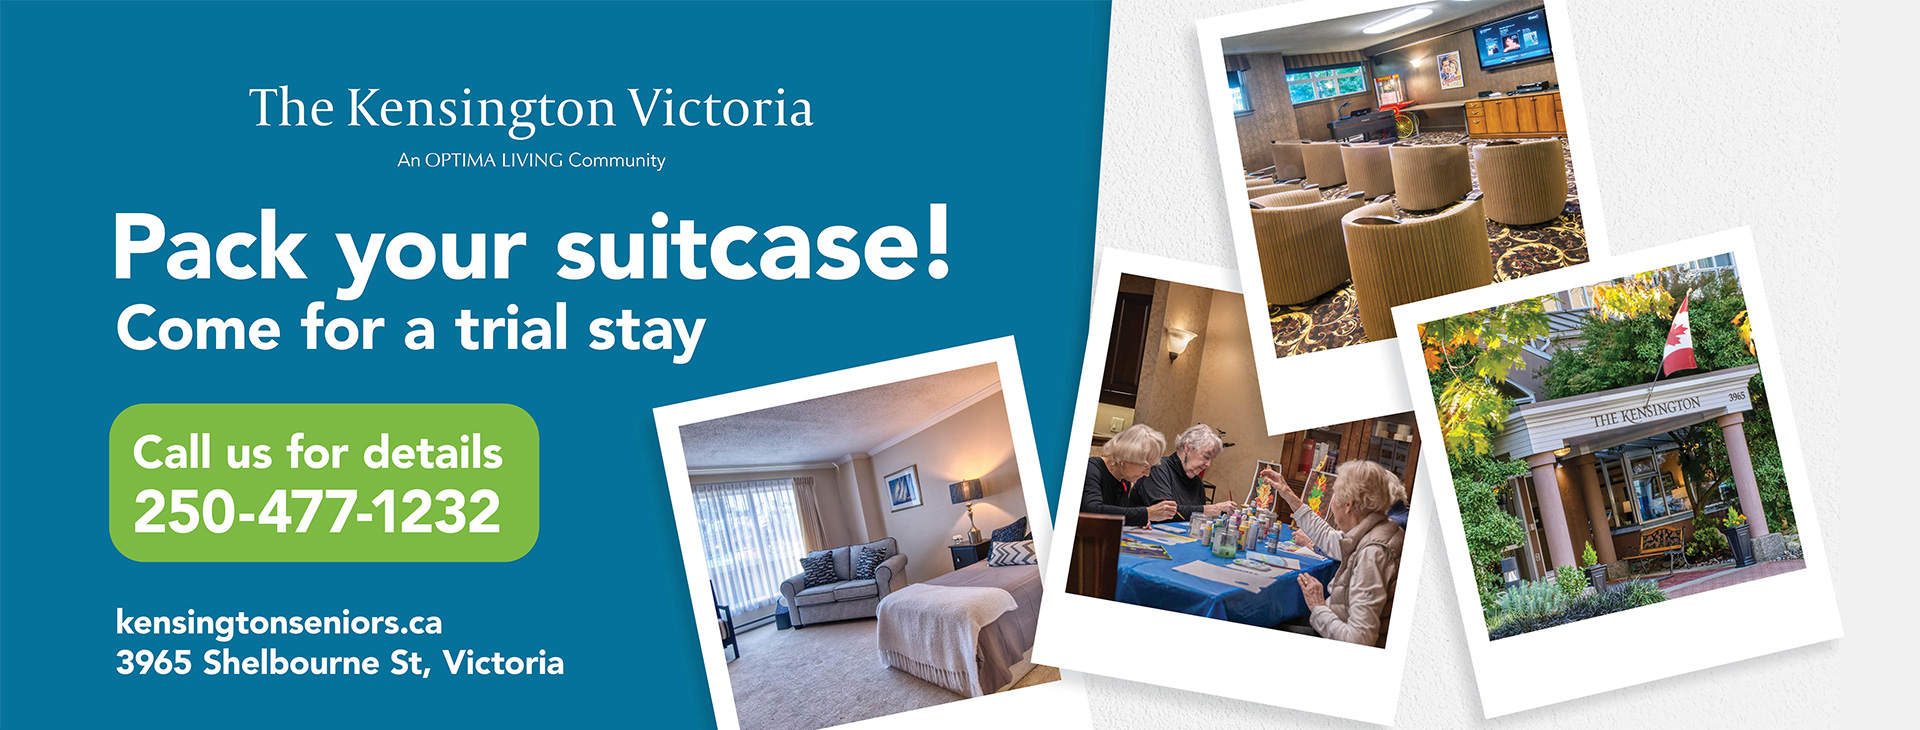 Collage of photos from The Kensington Victoria with Pack your suitcase information